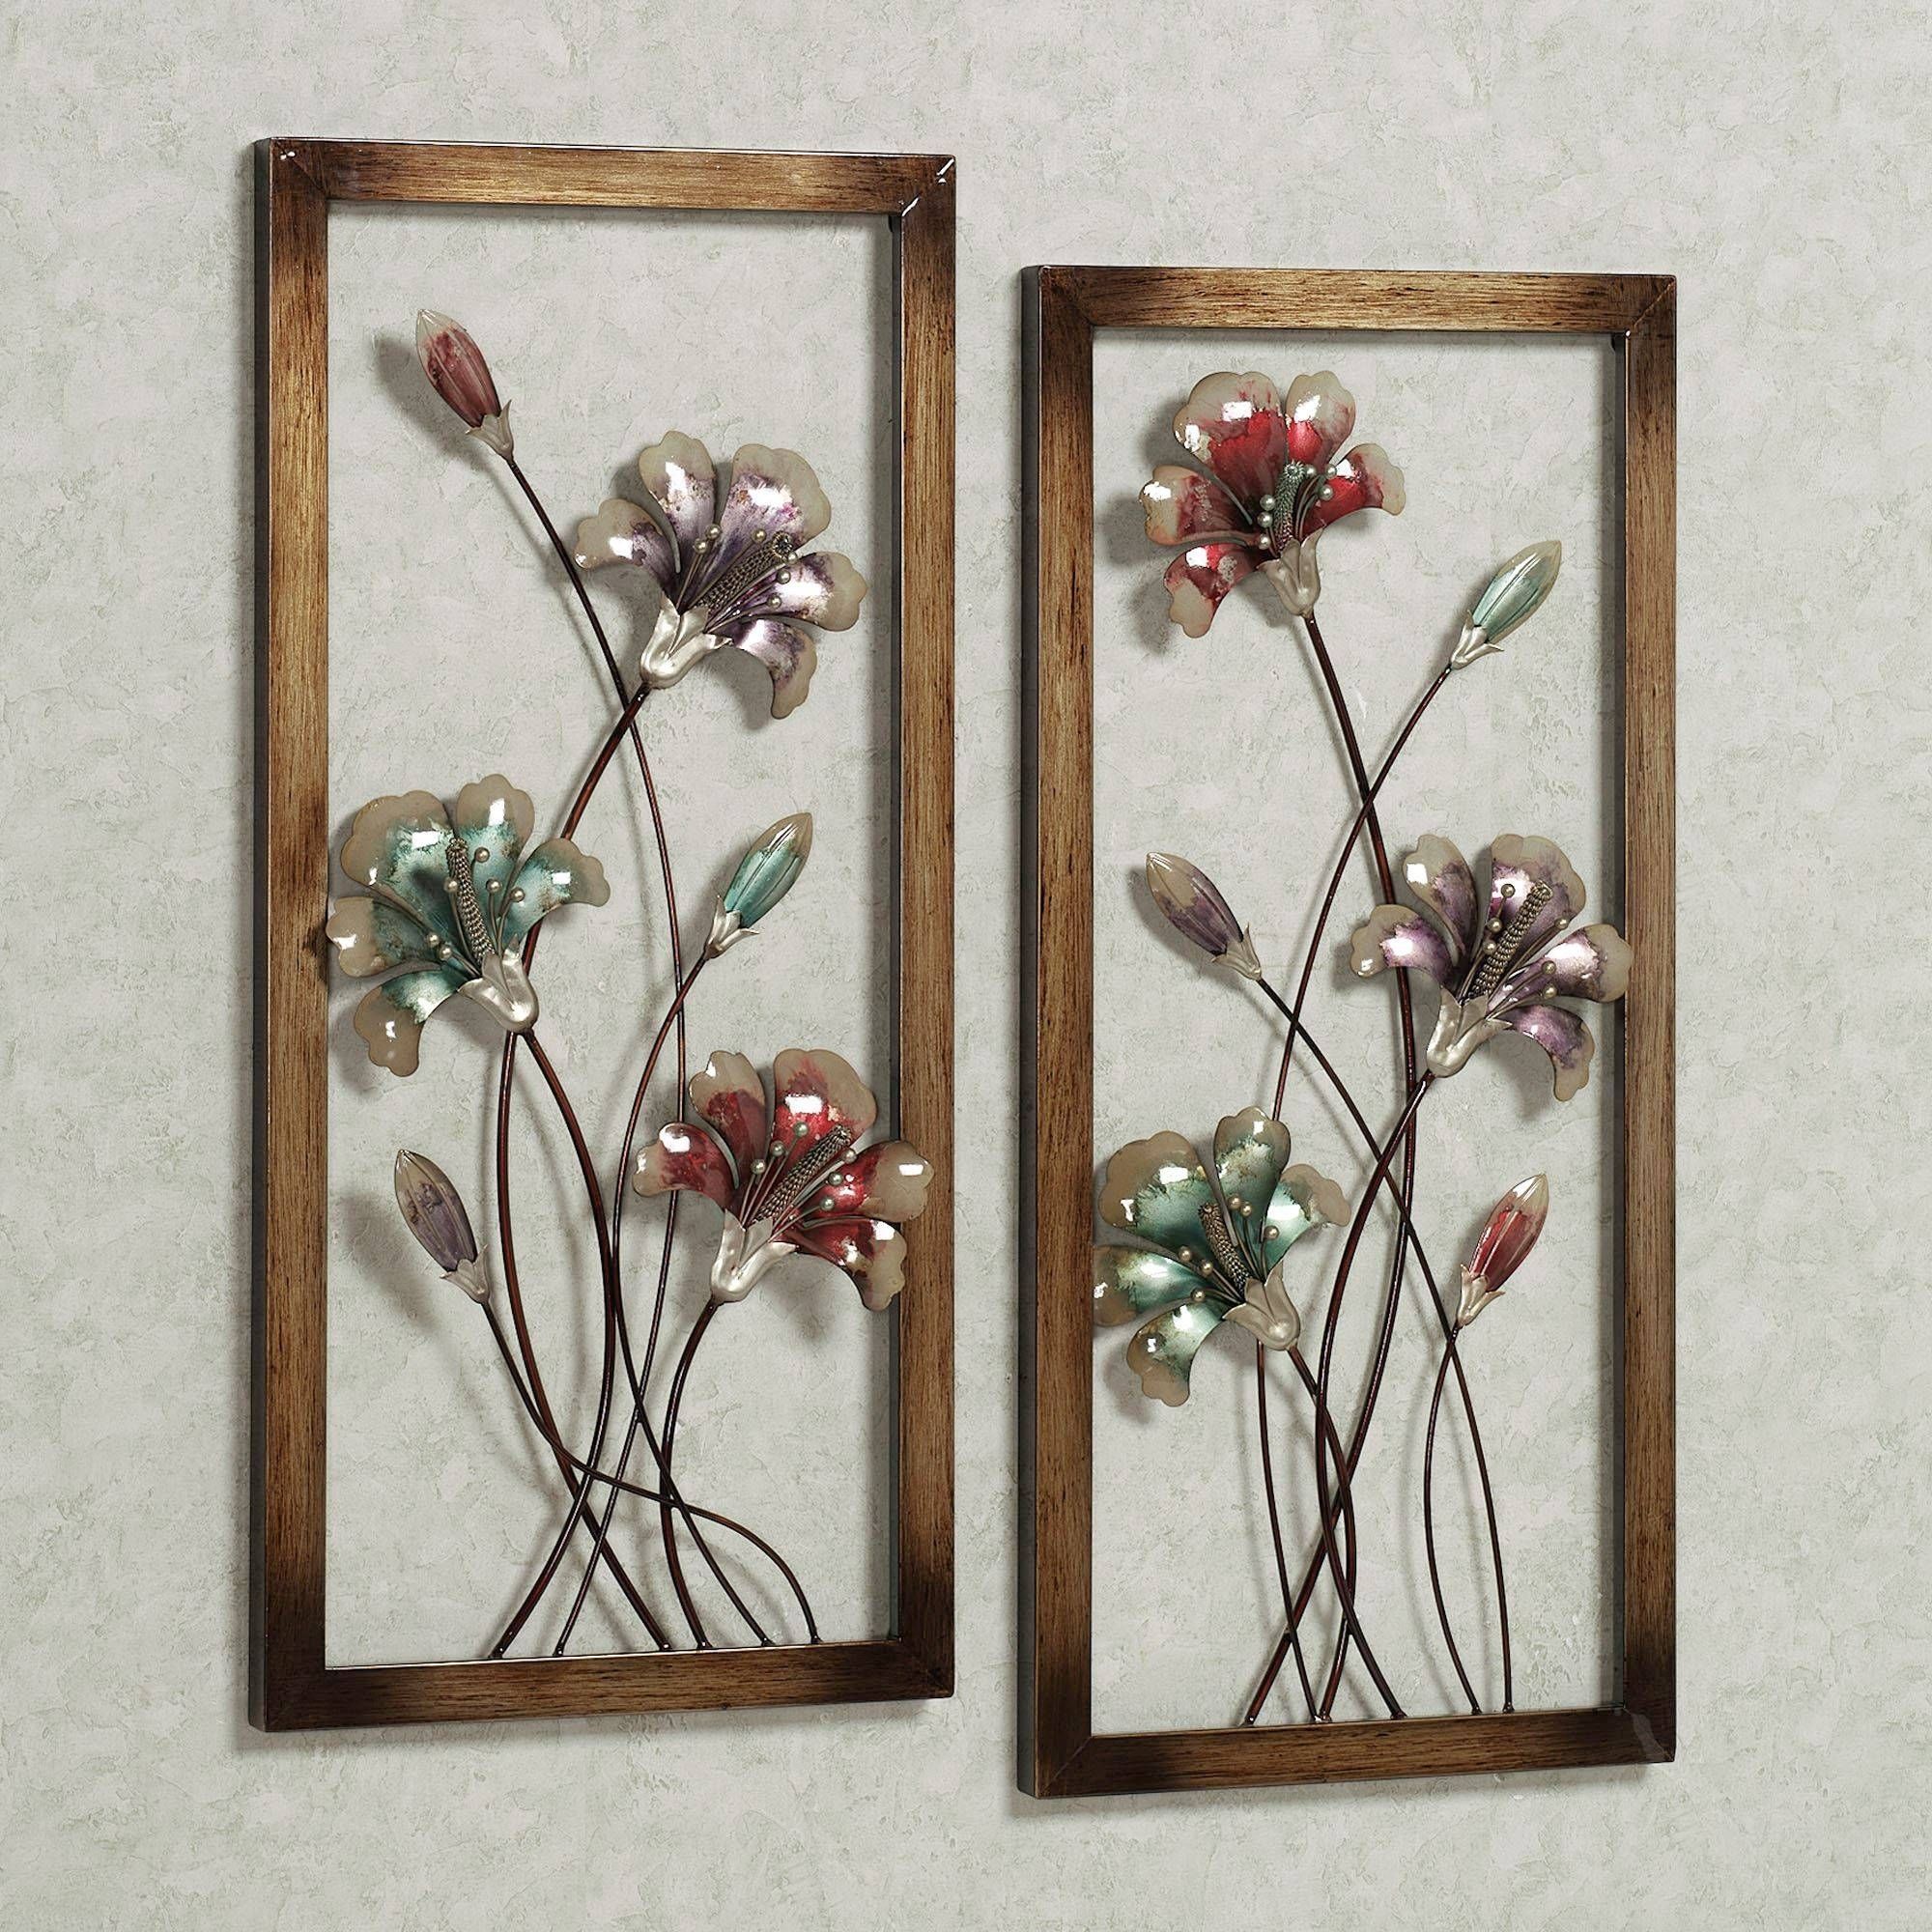 Garden Whispers Floral Metal Wall Art Panel Set Pertaining To Most Up To Date Metal Wall Art Panels (View 19 of 20)